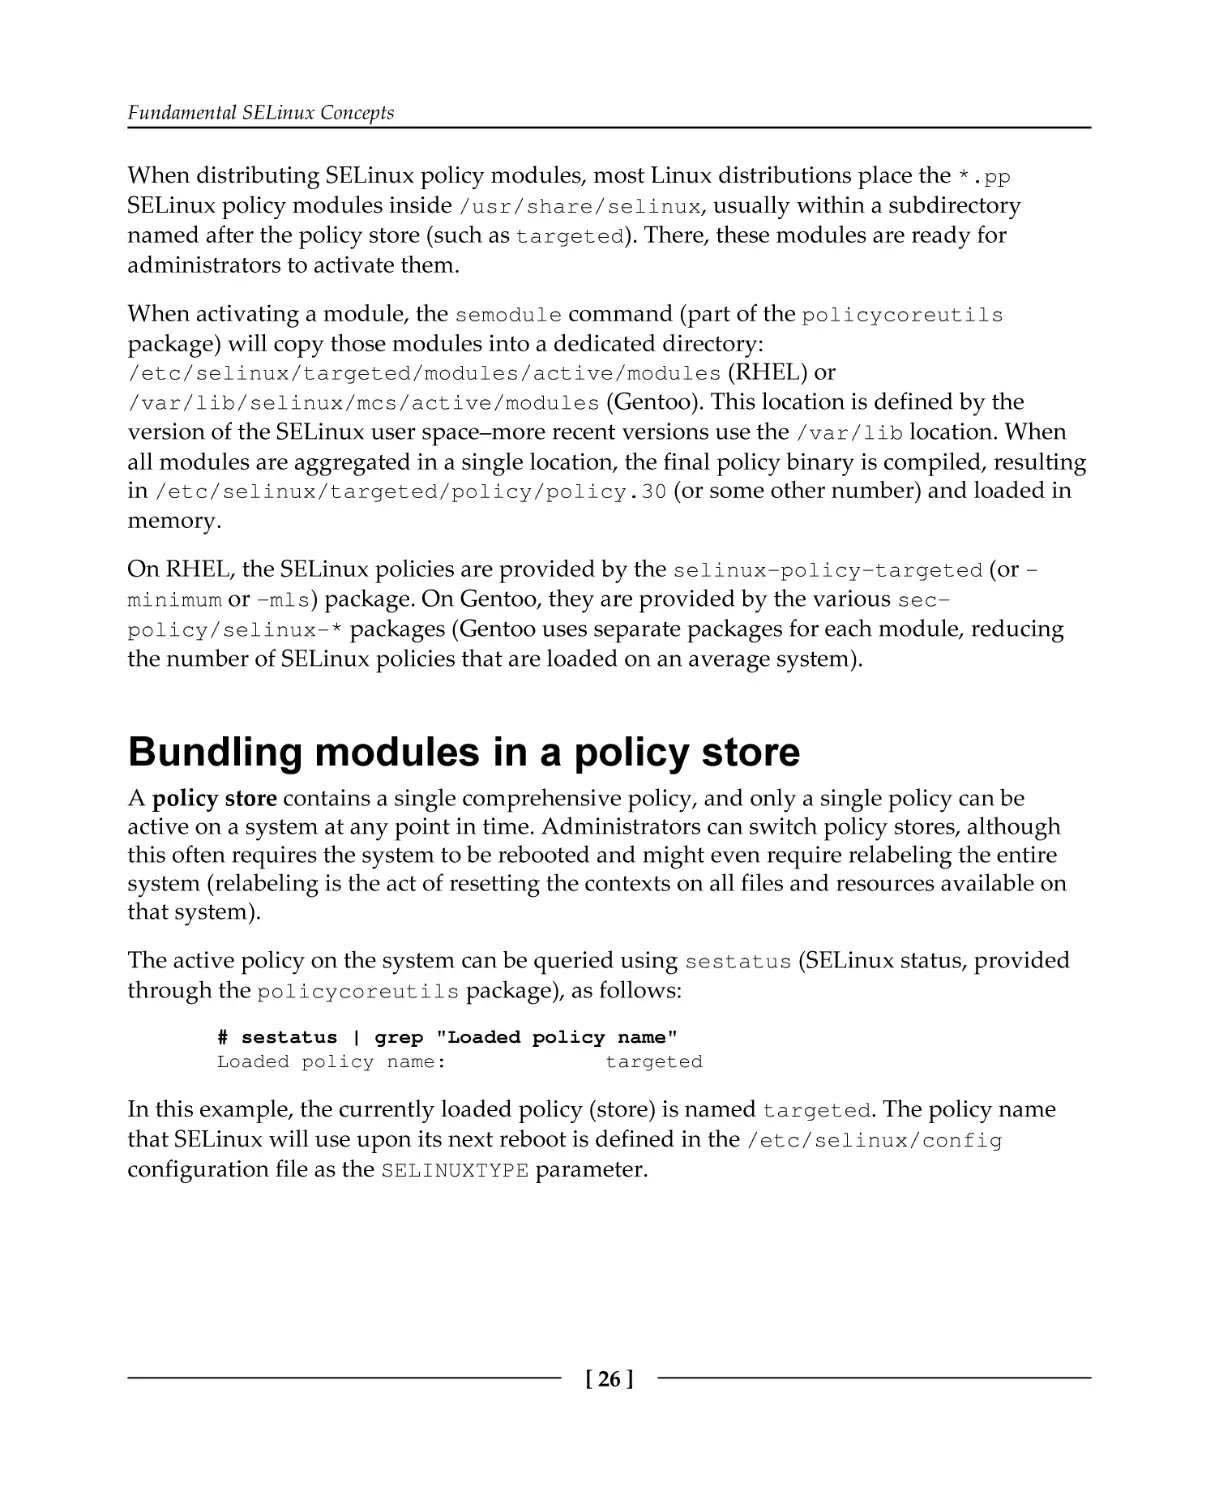 Bundling modules in a policy store